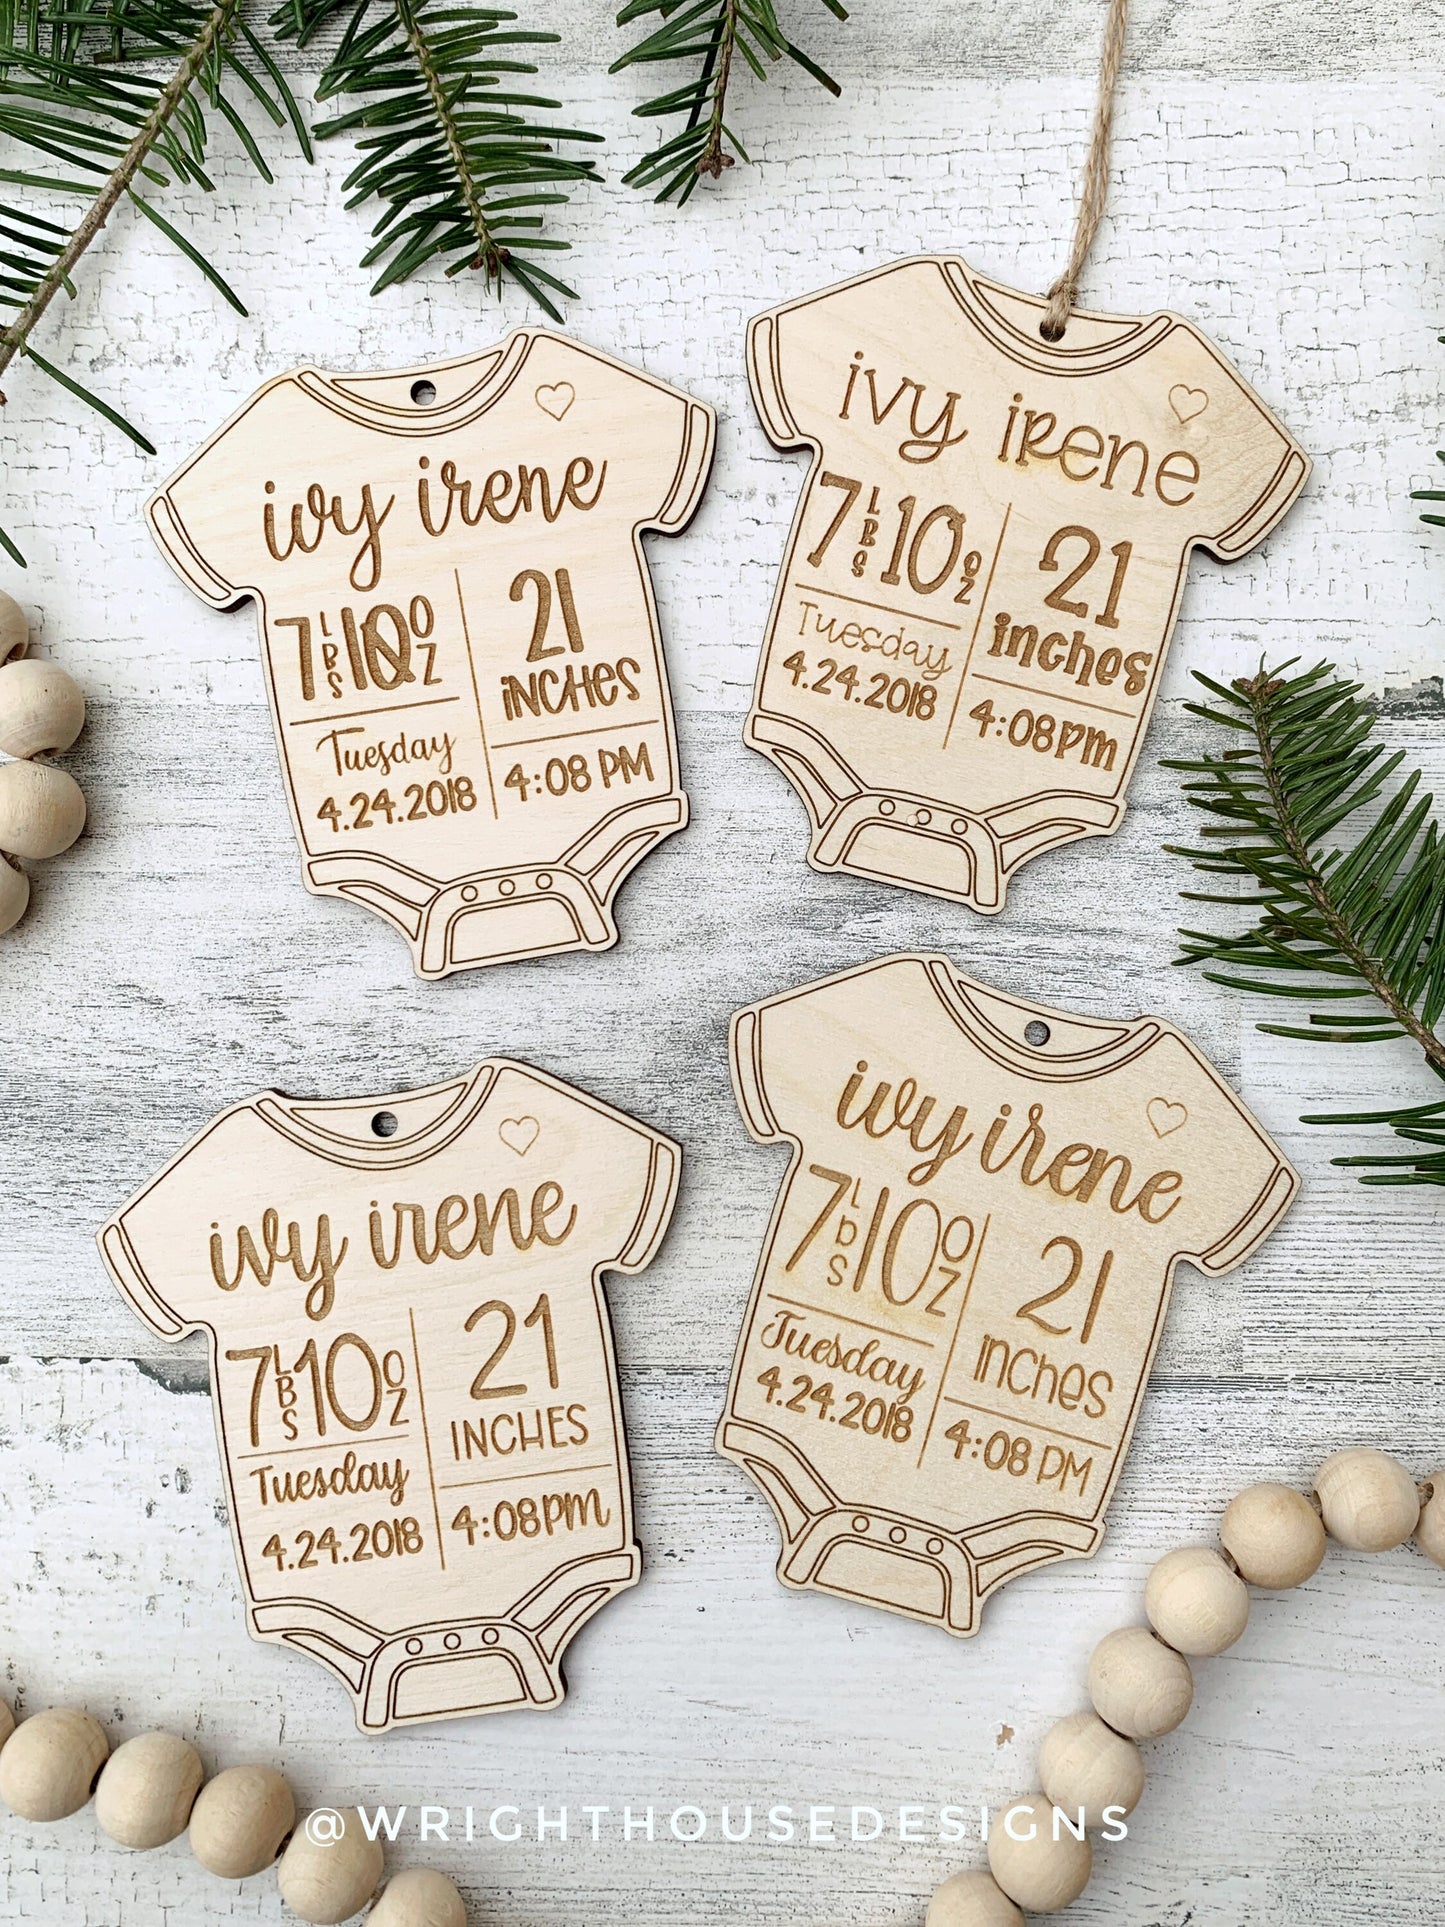 Baby Bodysuit Ornament - Baby's First Christmas Ornament - Personalized Newborn Birth Announcement - Birth Vitals